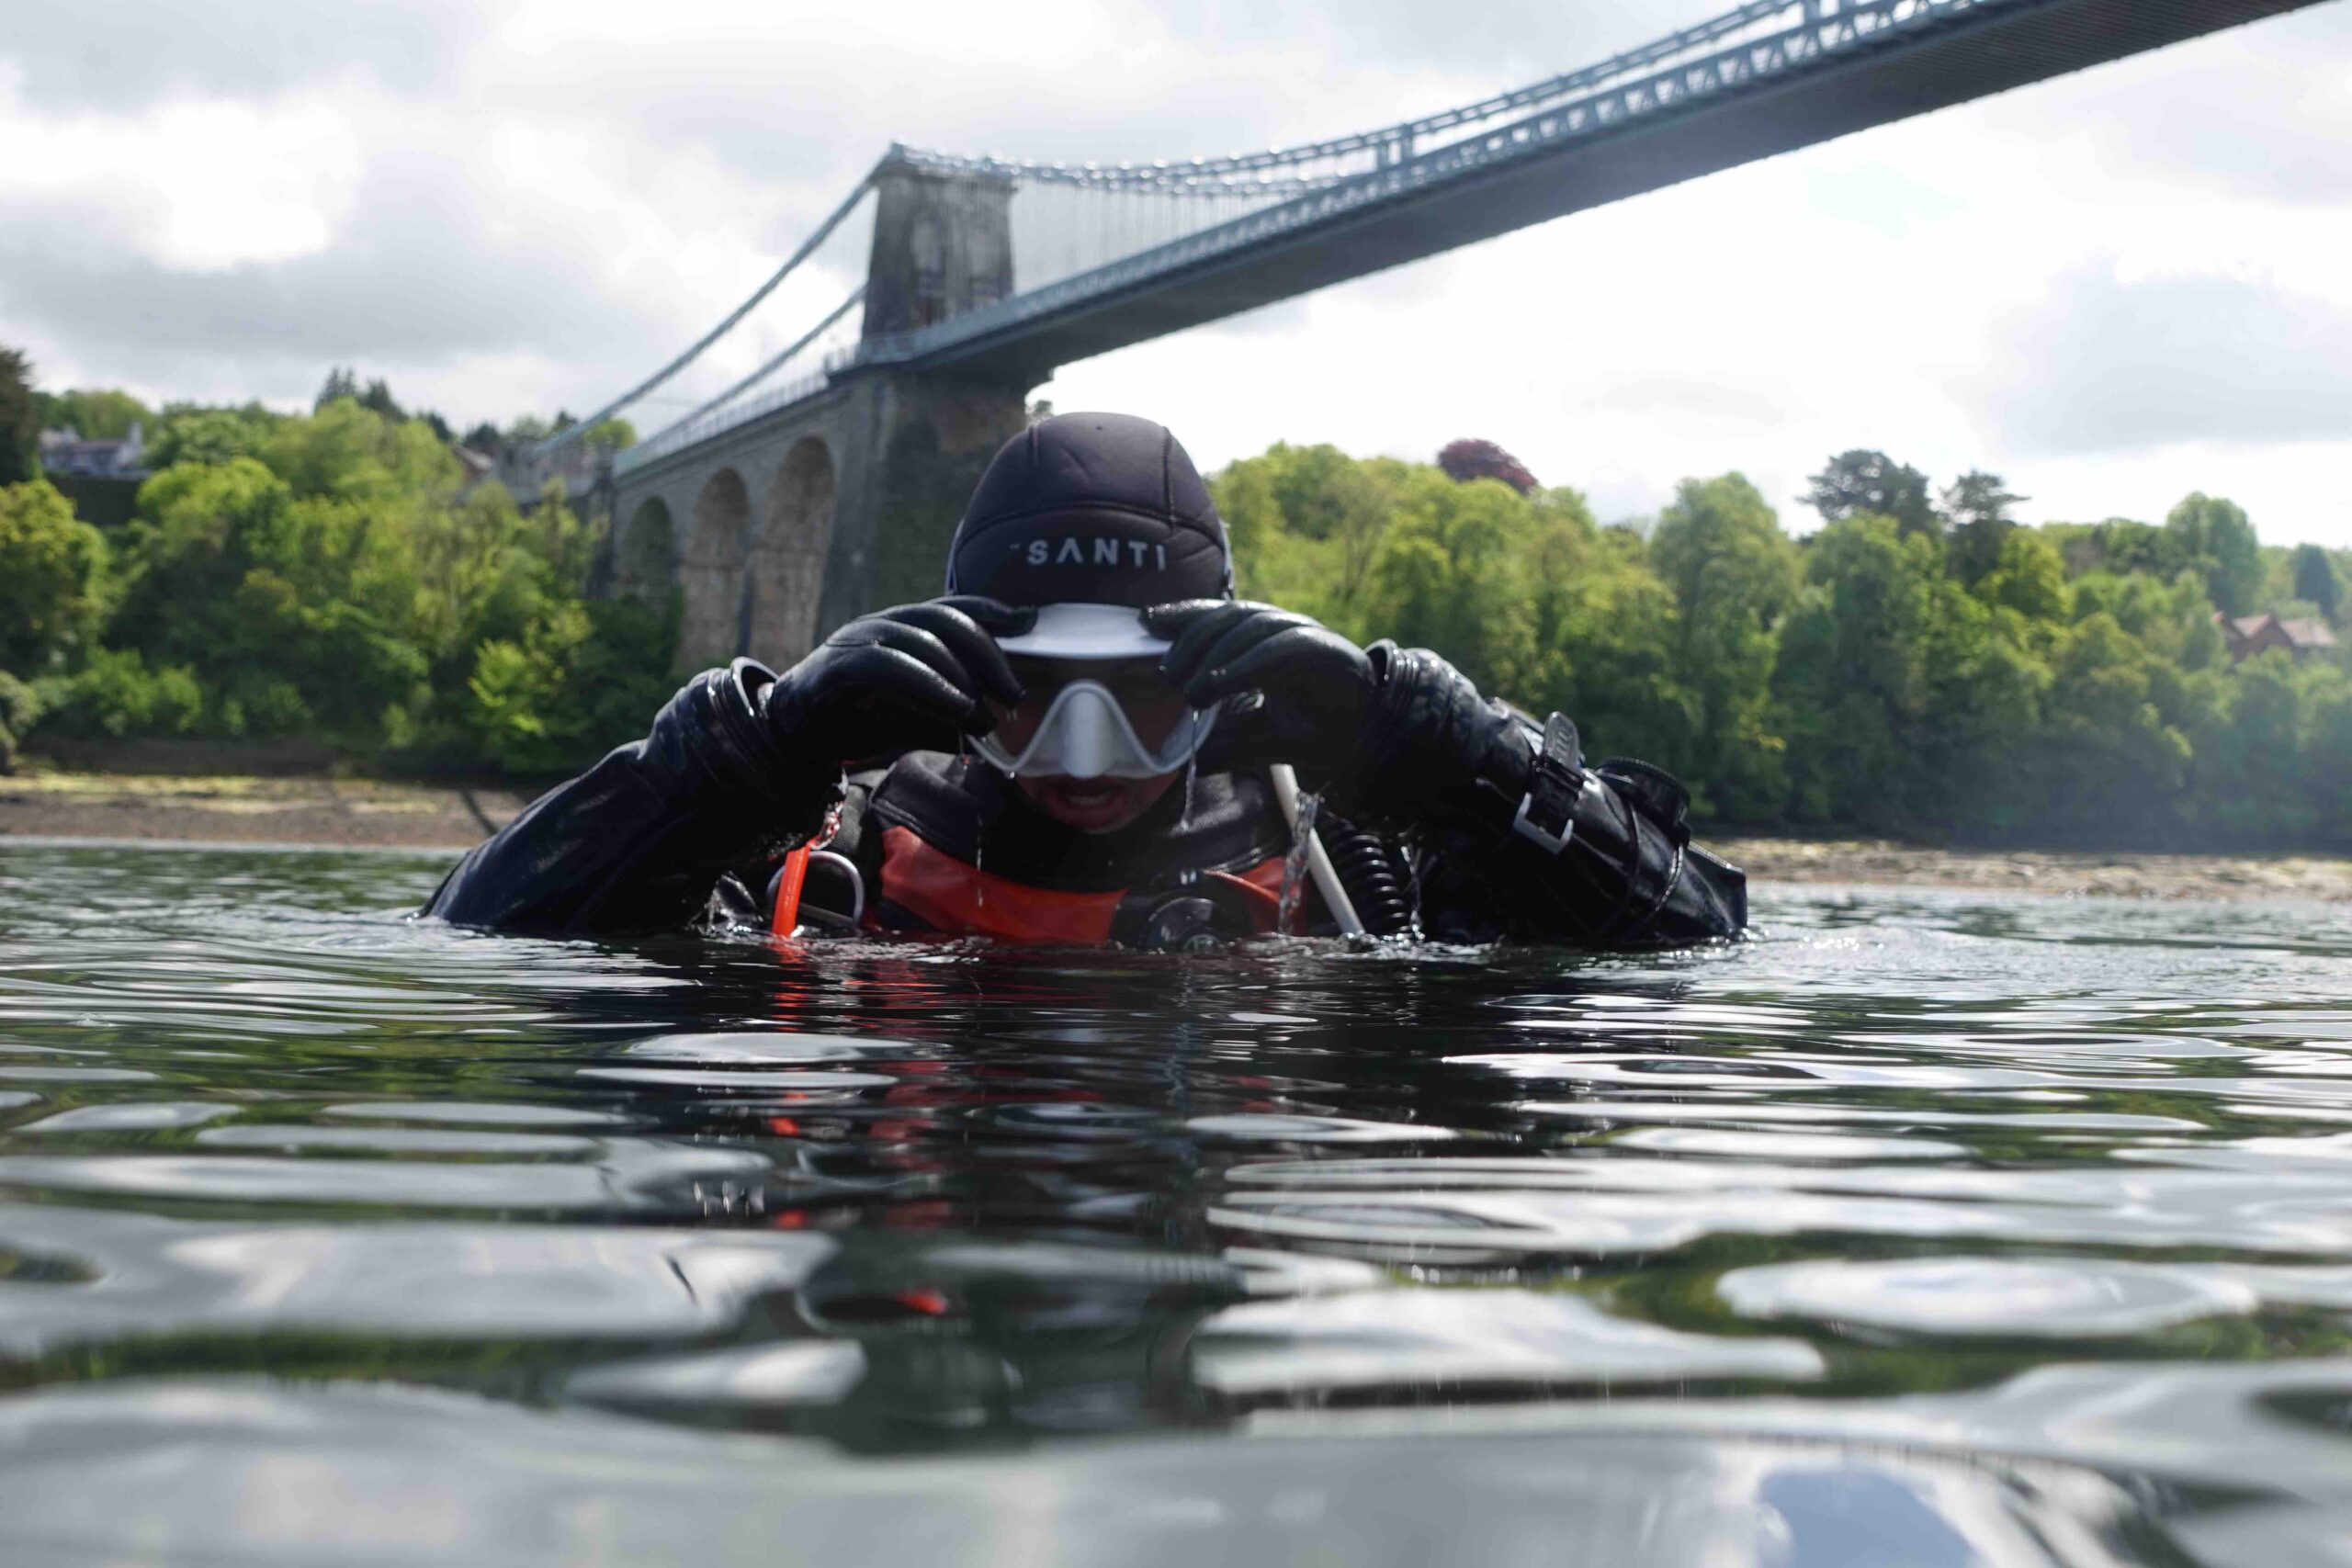 Scuba diver in the water placing mask on face.